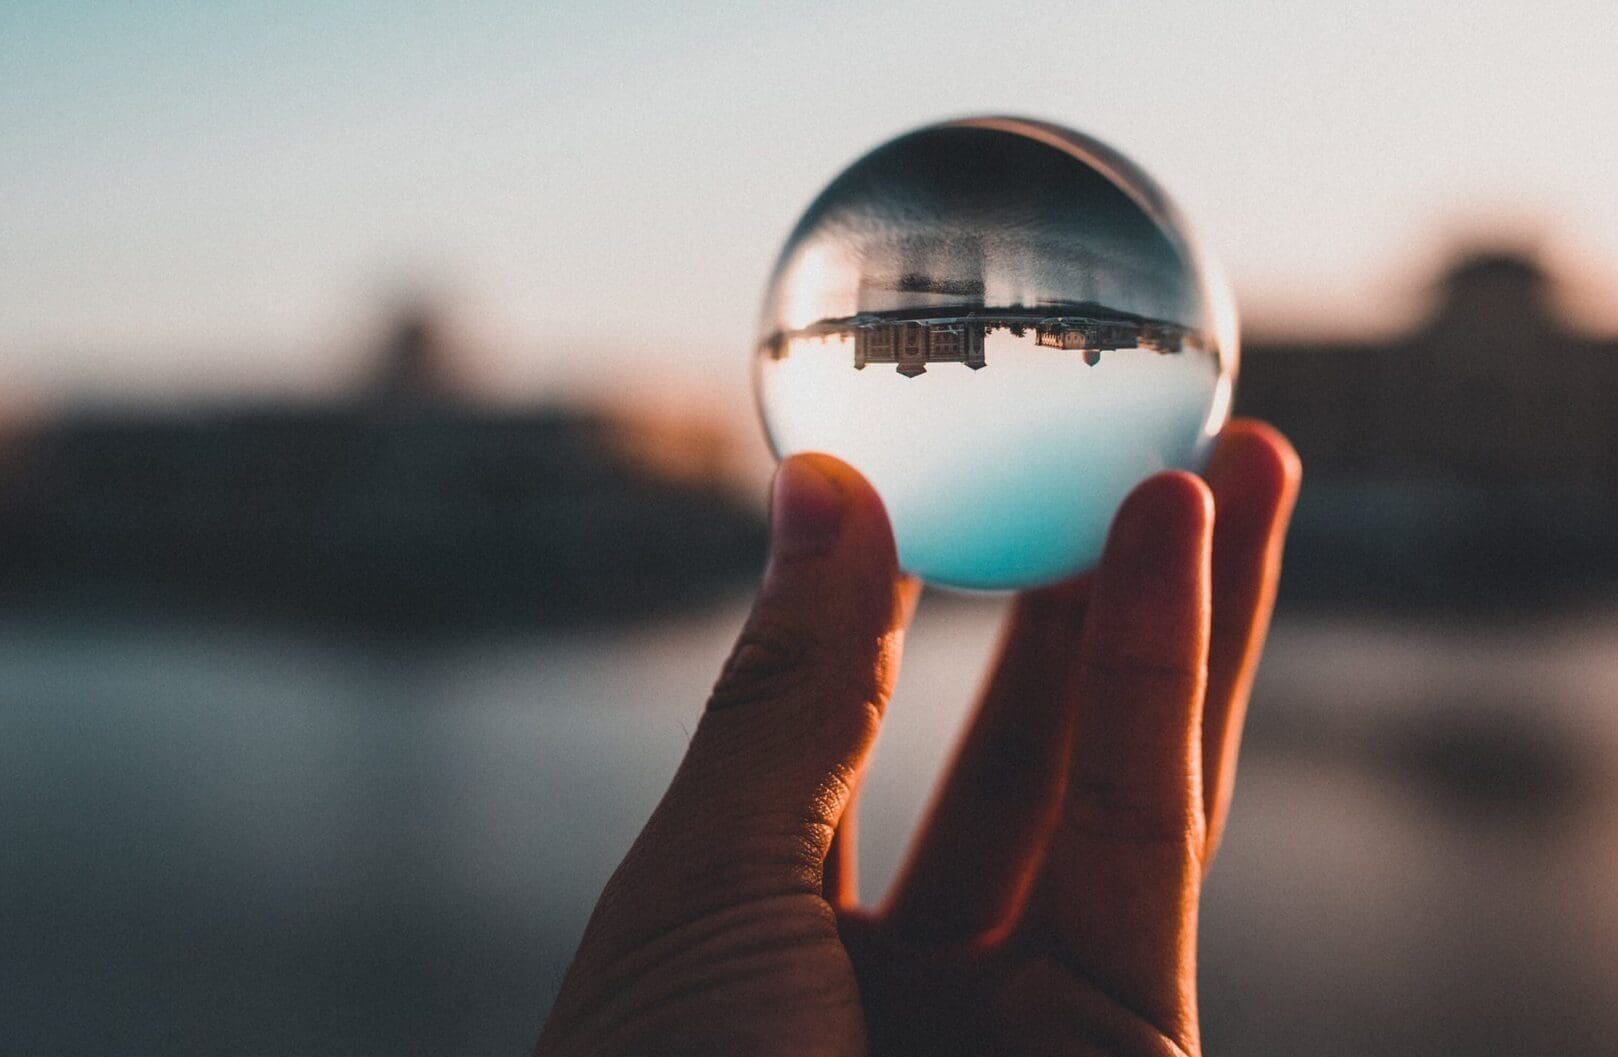 A person holding onto a glass ball